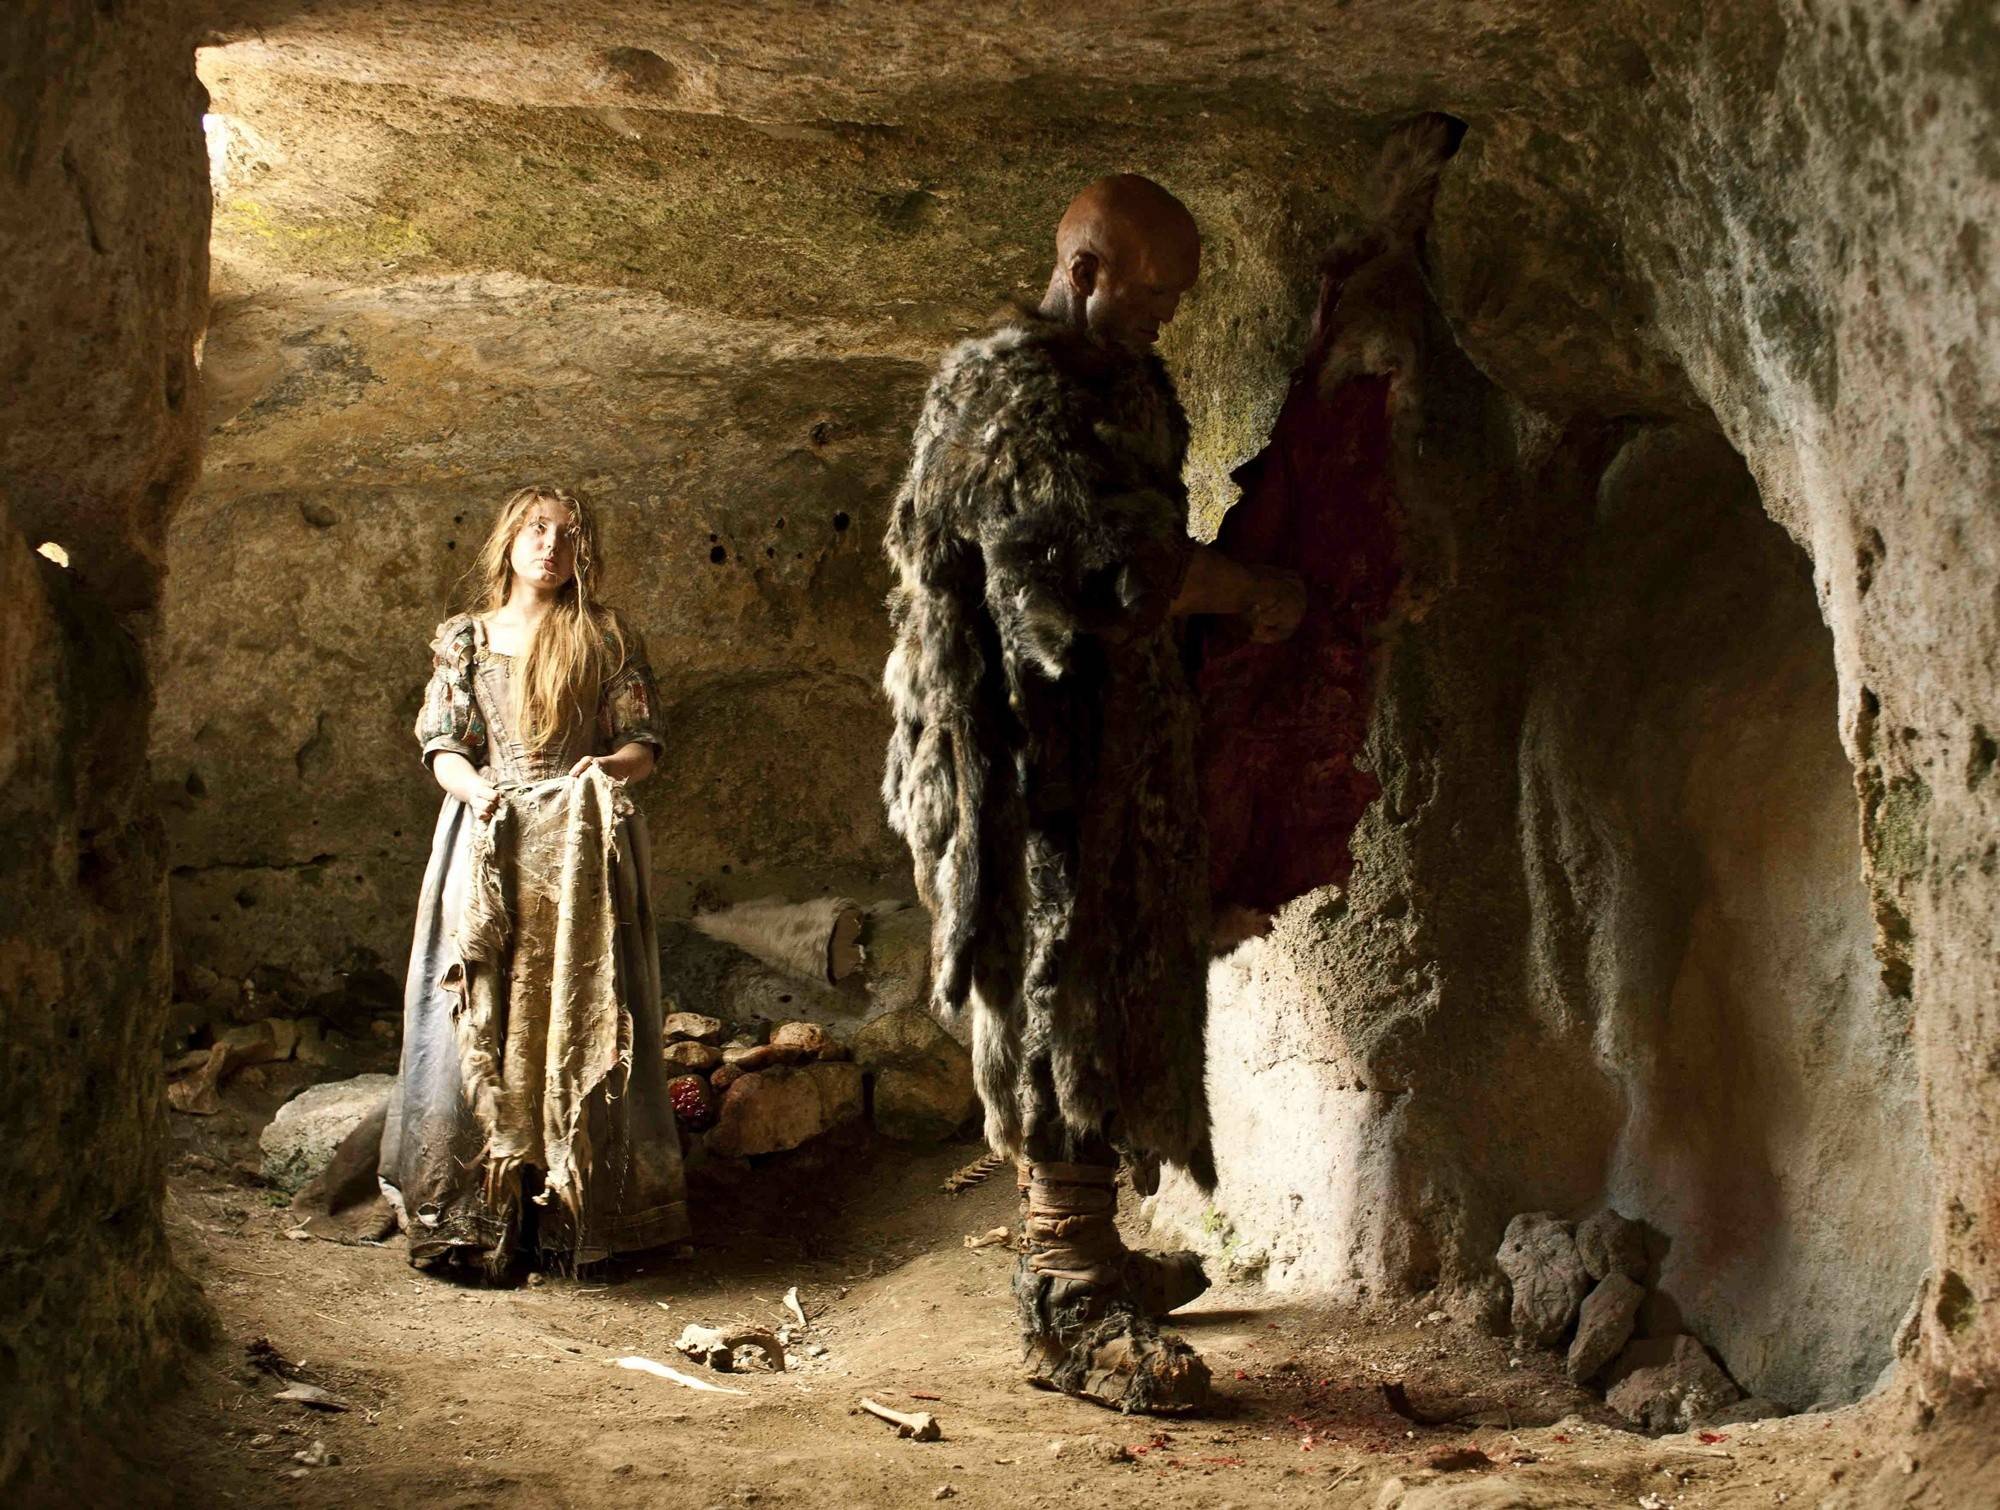 Bebe Cave stars as Violet and Guillaume Delaunay stars as Ogre in IFC Films' The Tale of Tales (2016)